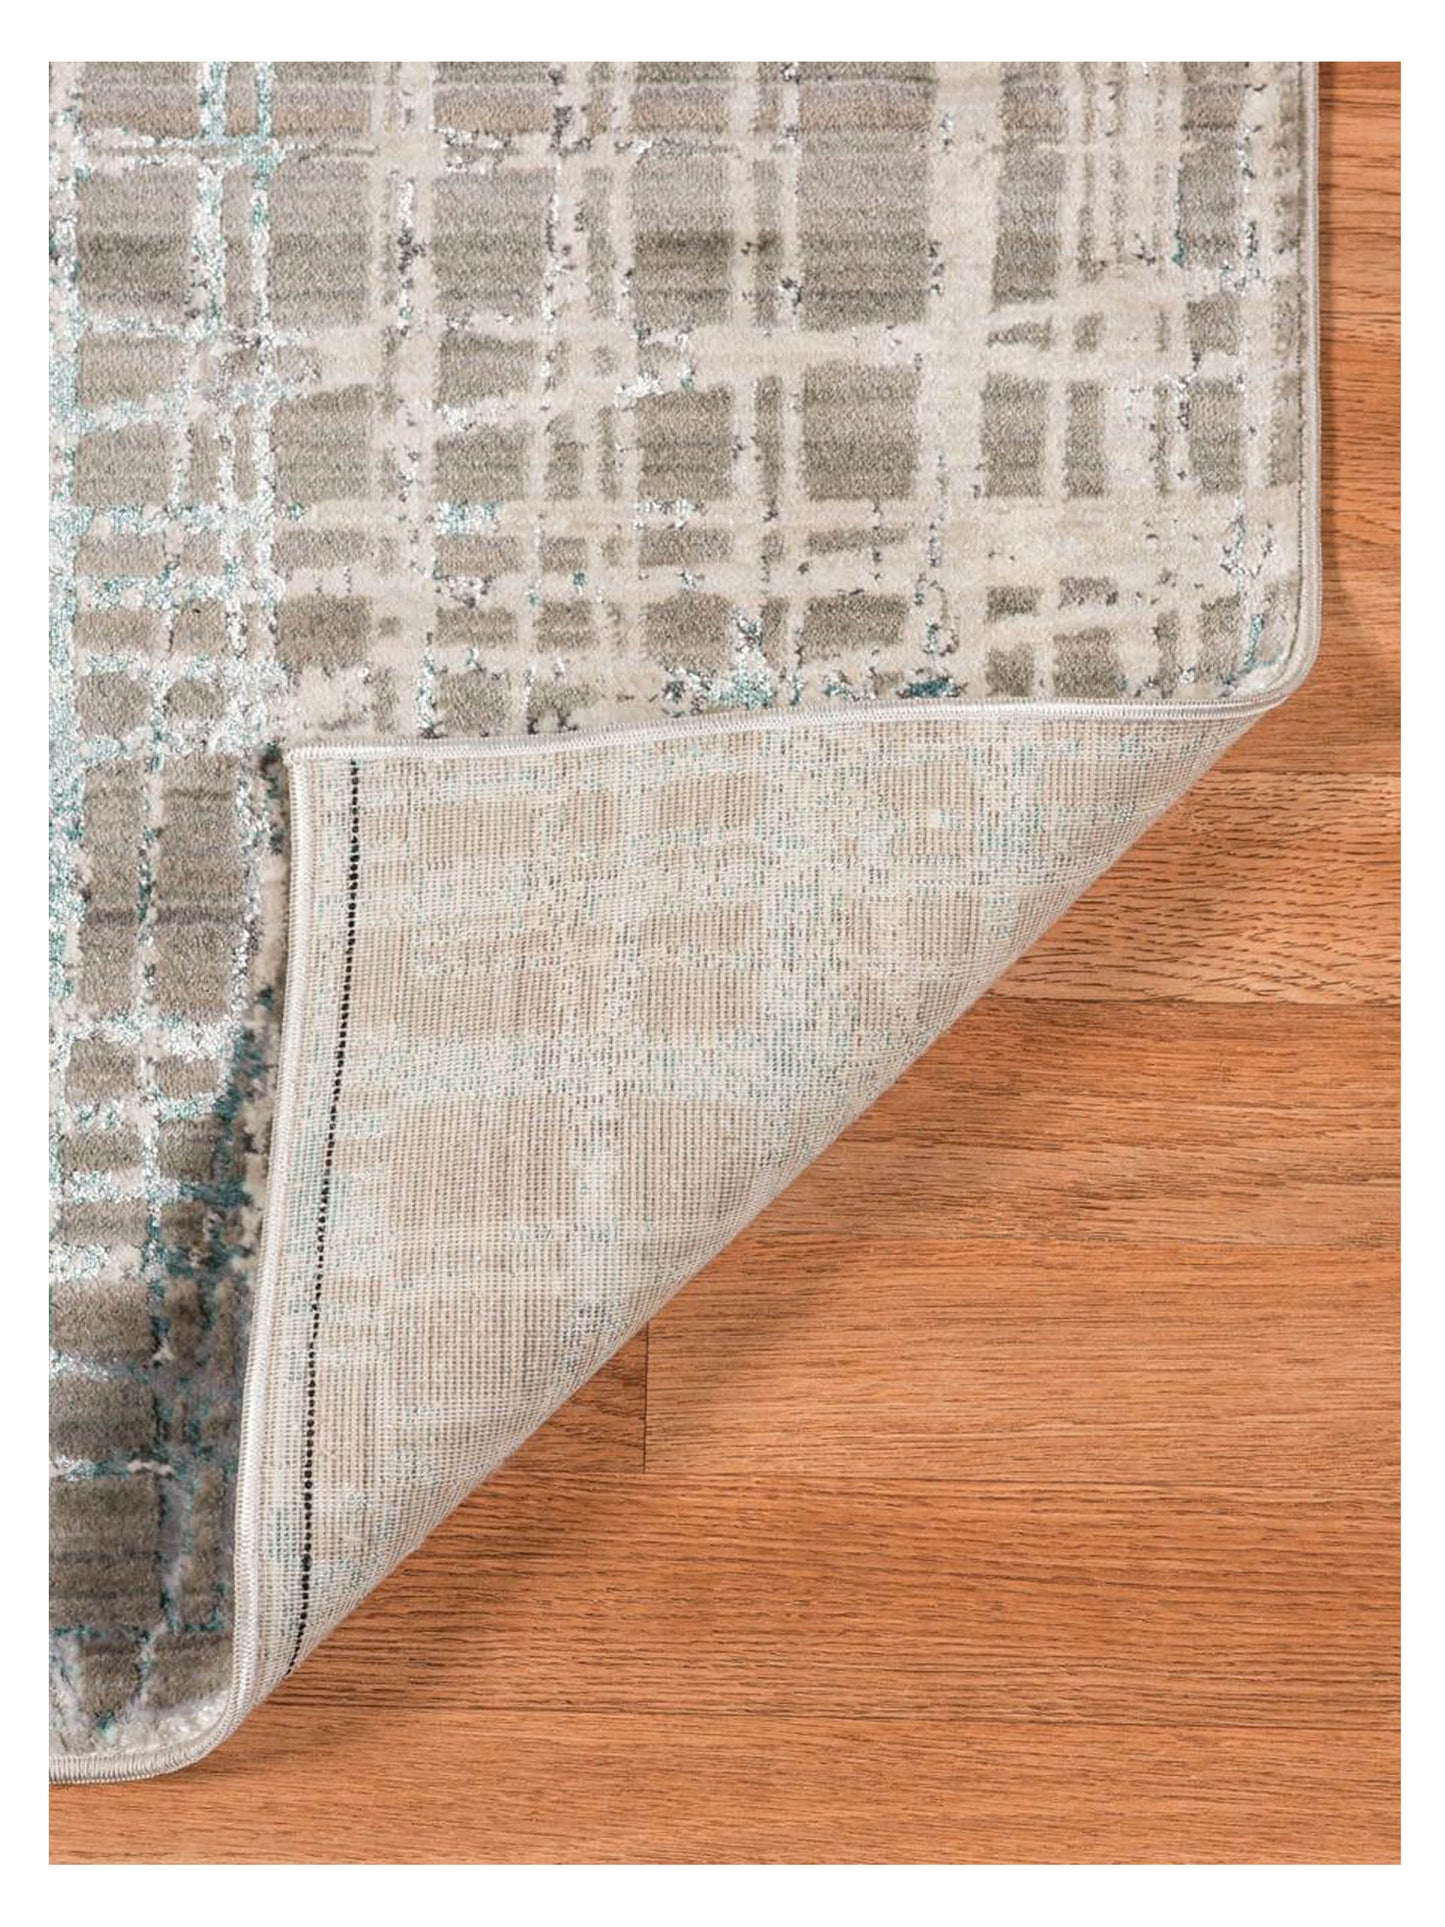 Limited Rosy RO-518 BLUE  Transitional Machinemade Rug